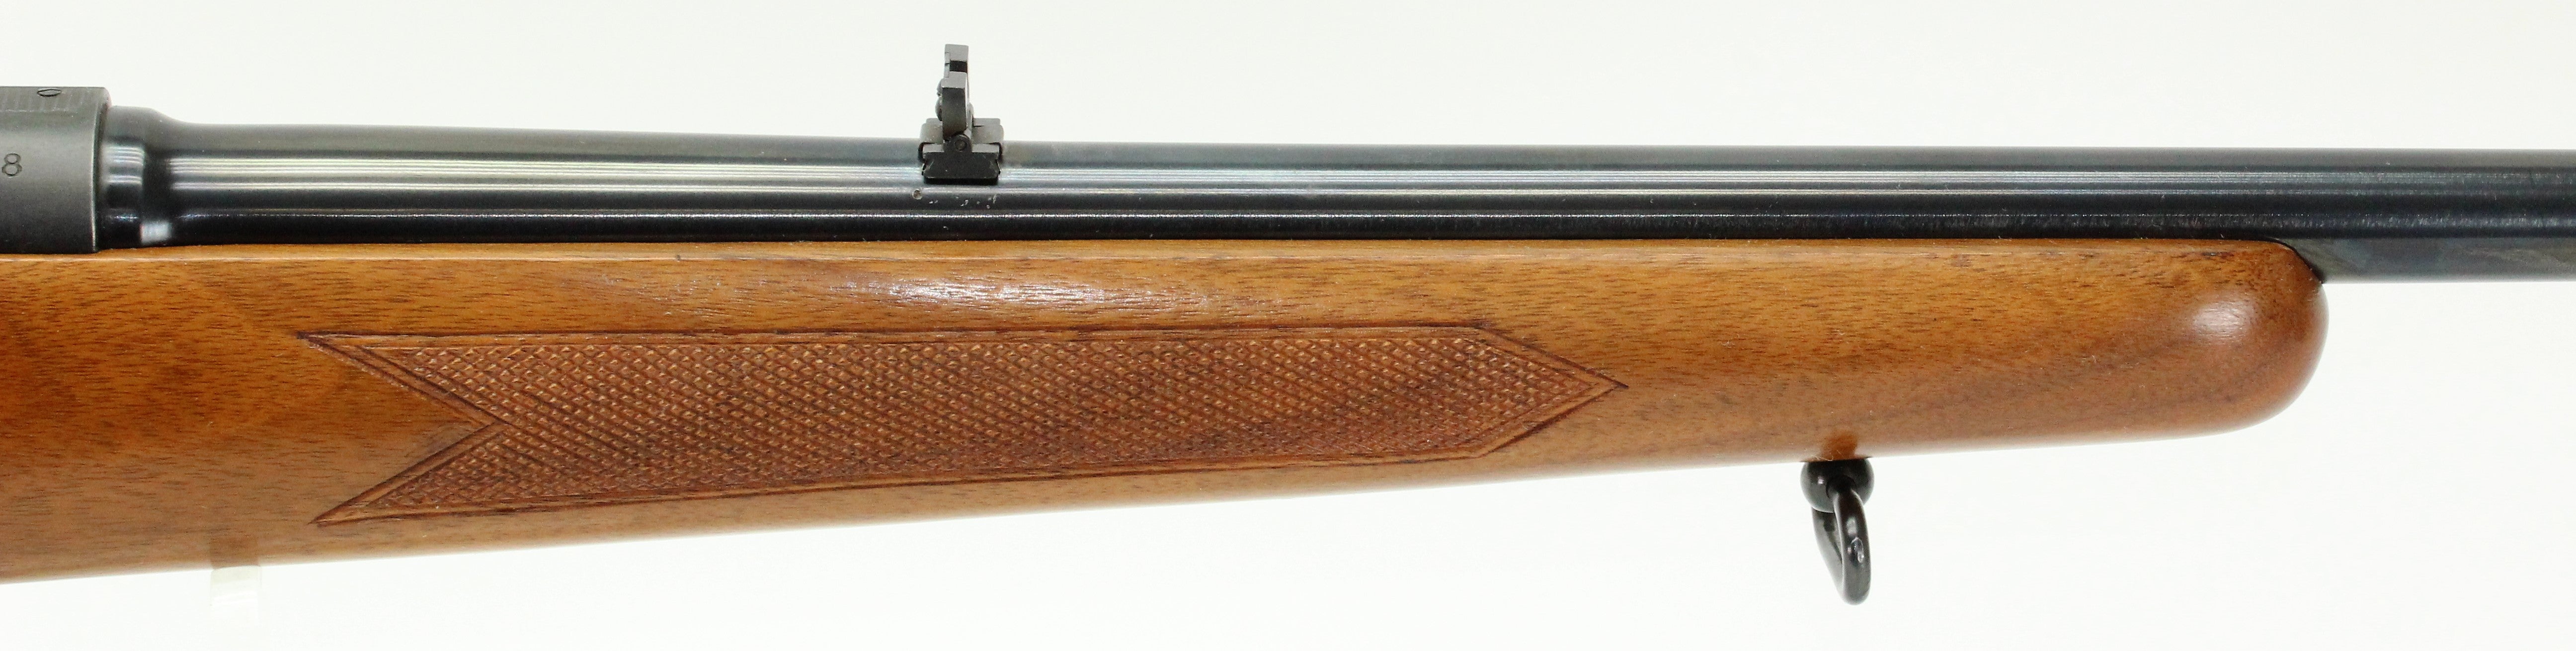 .270 Winchester Featherweight Rifle - 1960